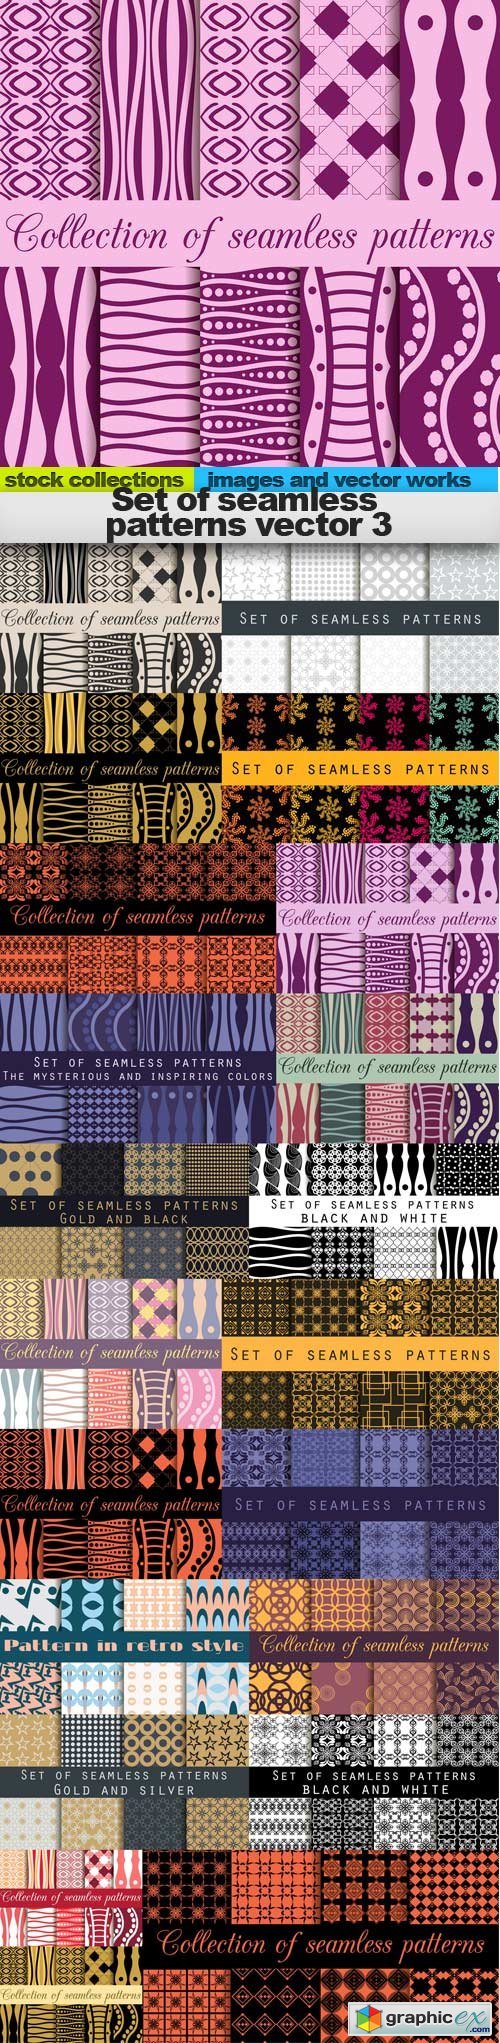 Set of seamless patterns vector 3, 21 x EPS